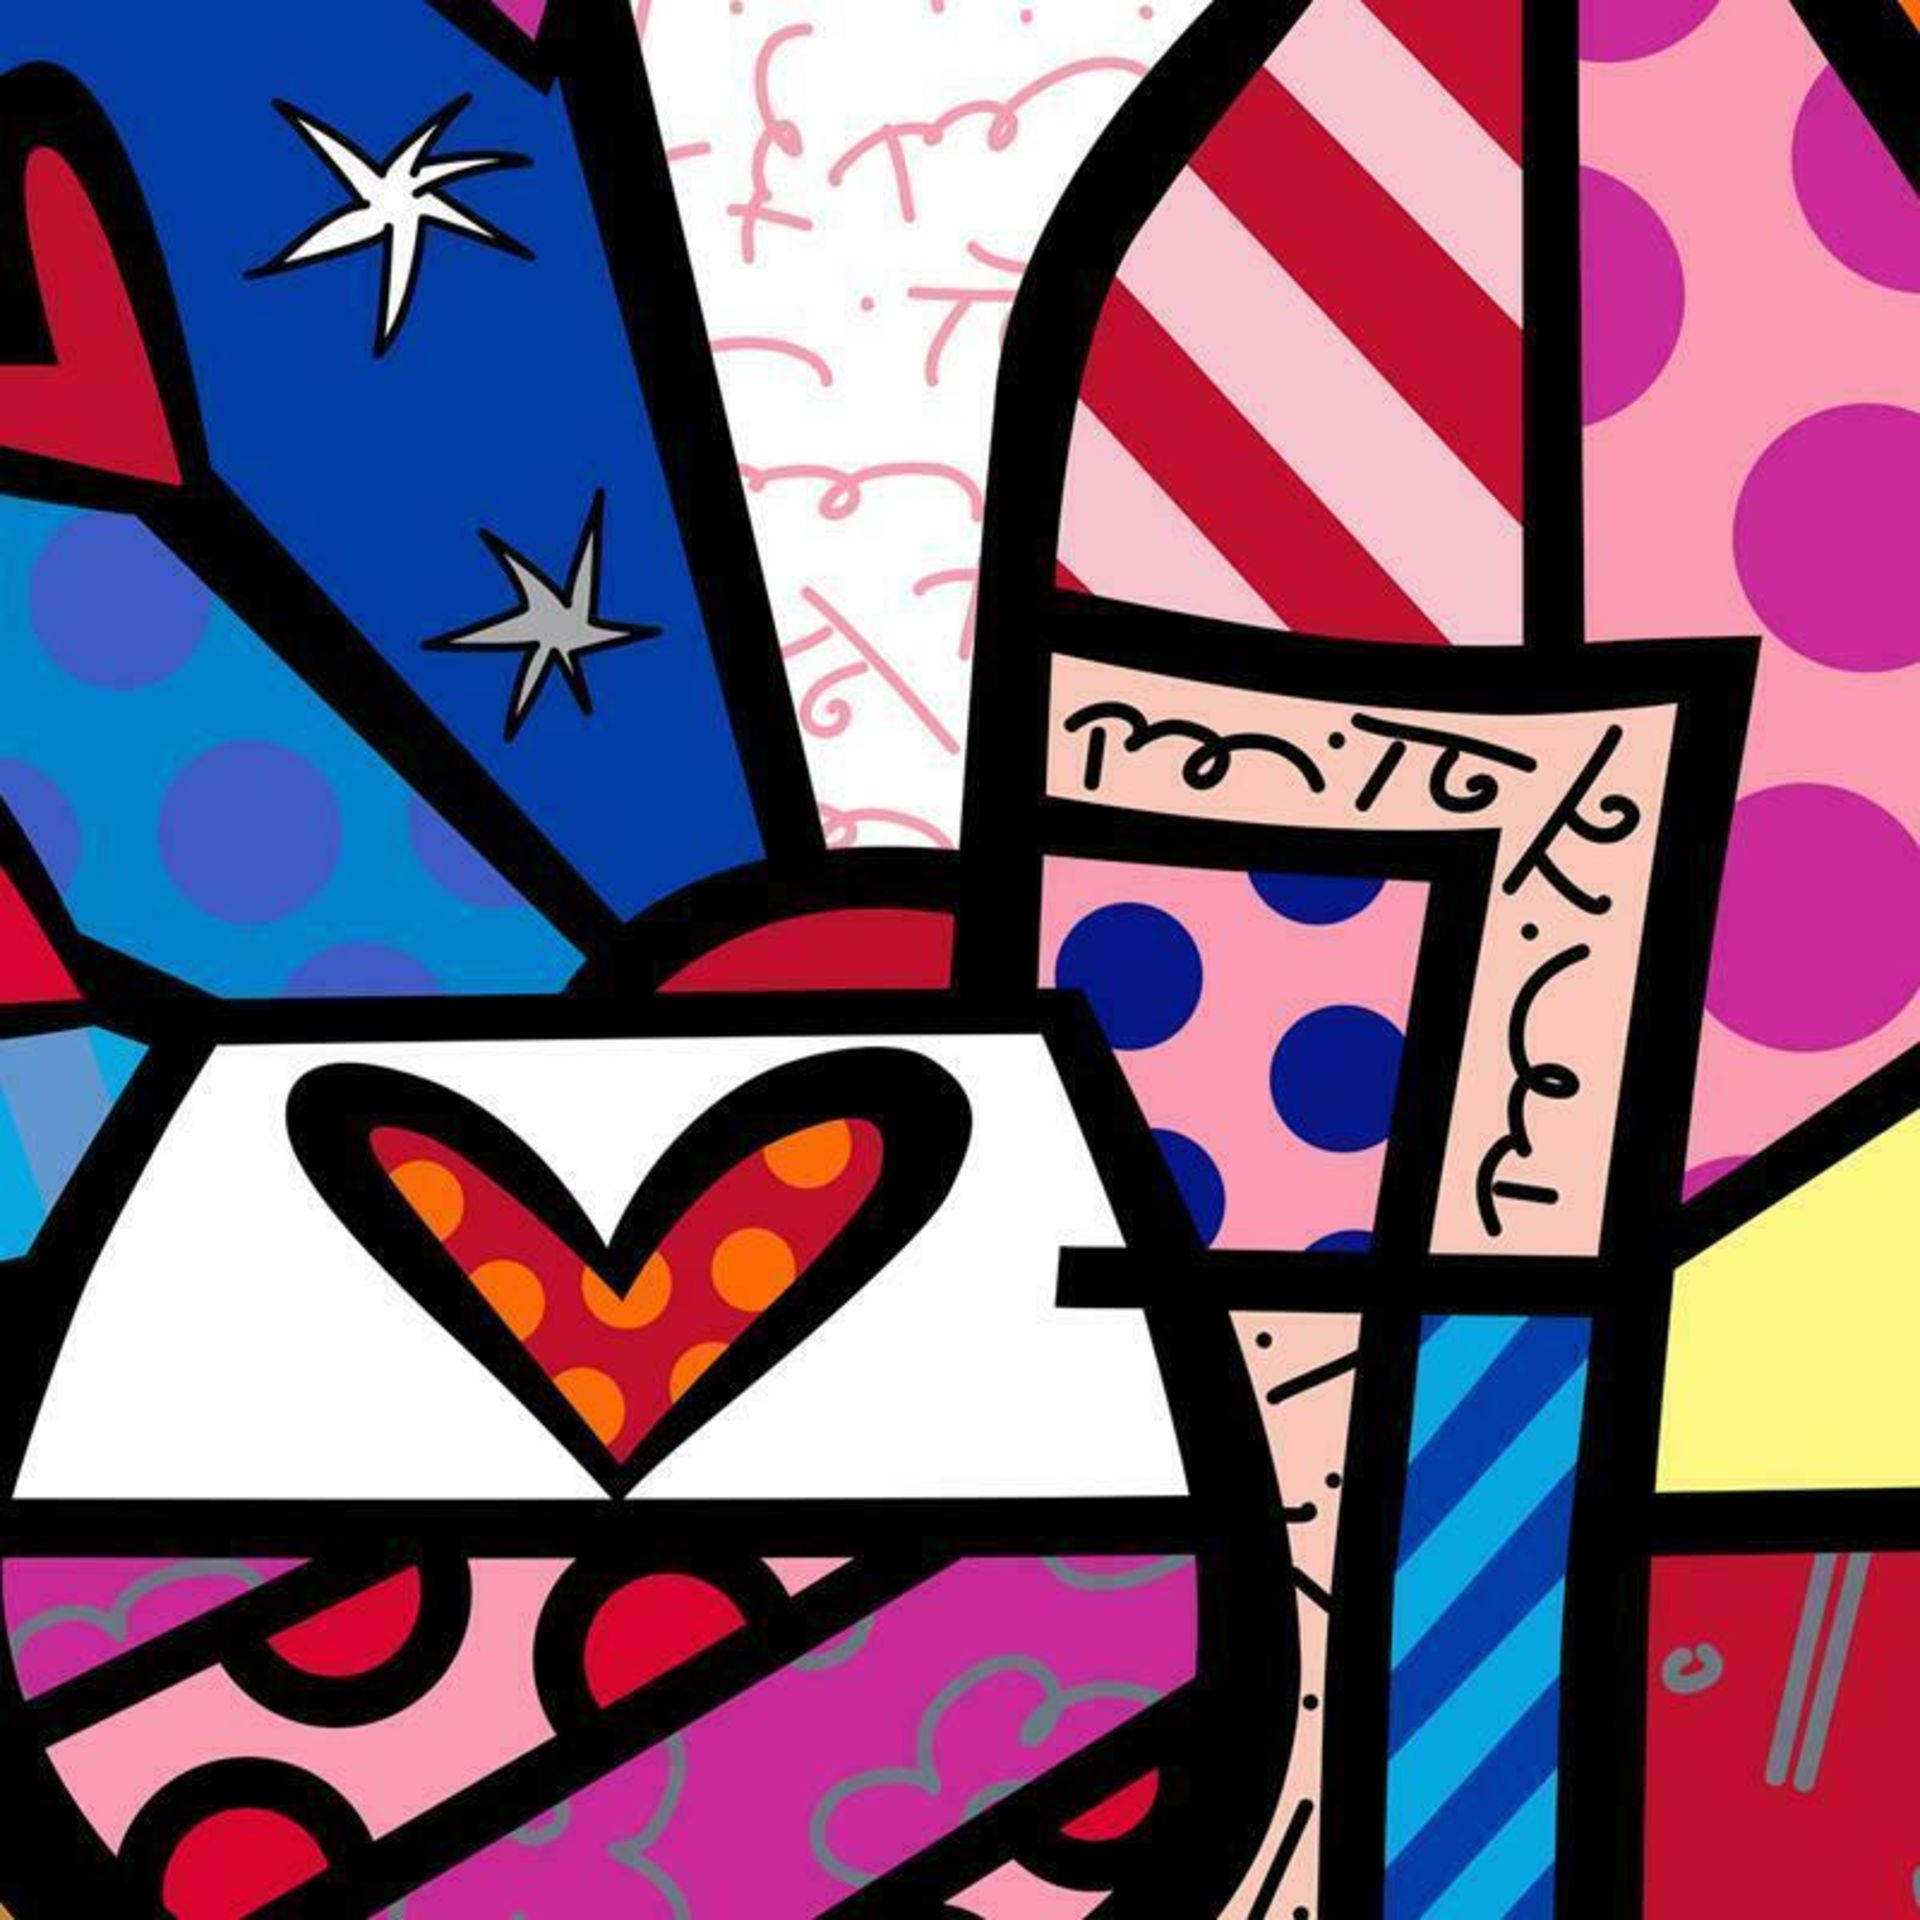 Rose All Day by Britto, Romero - Image 2 of 2